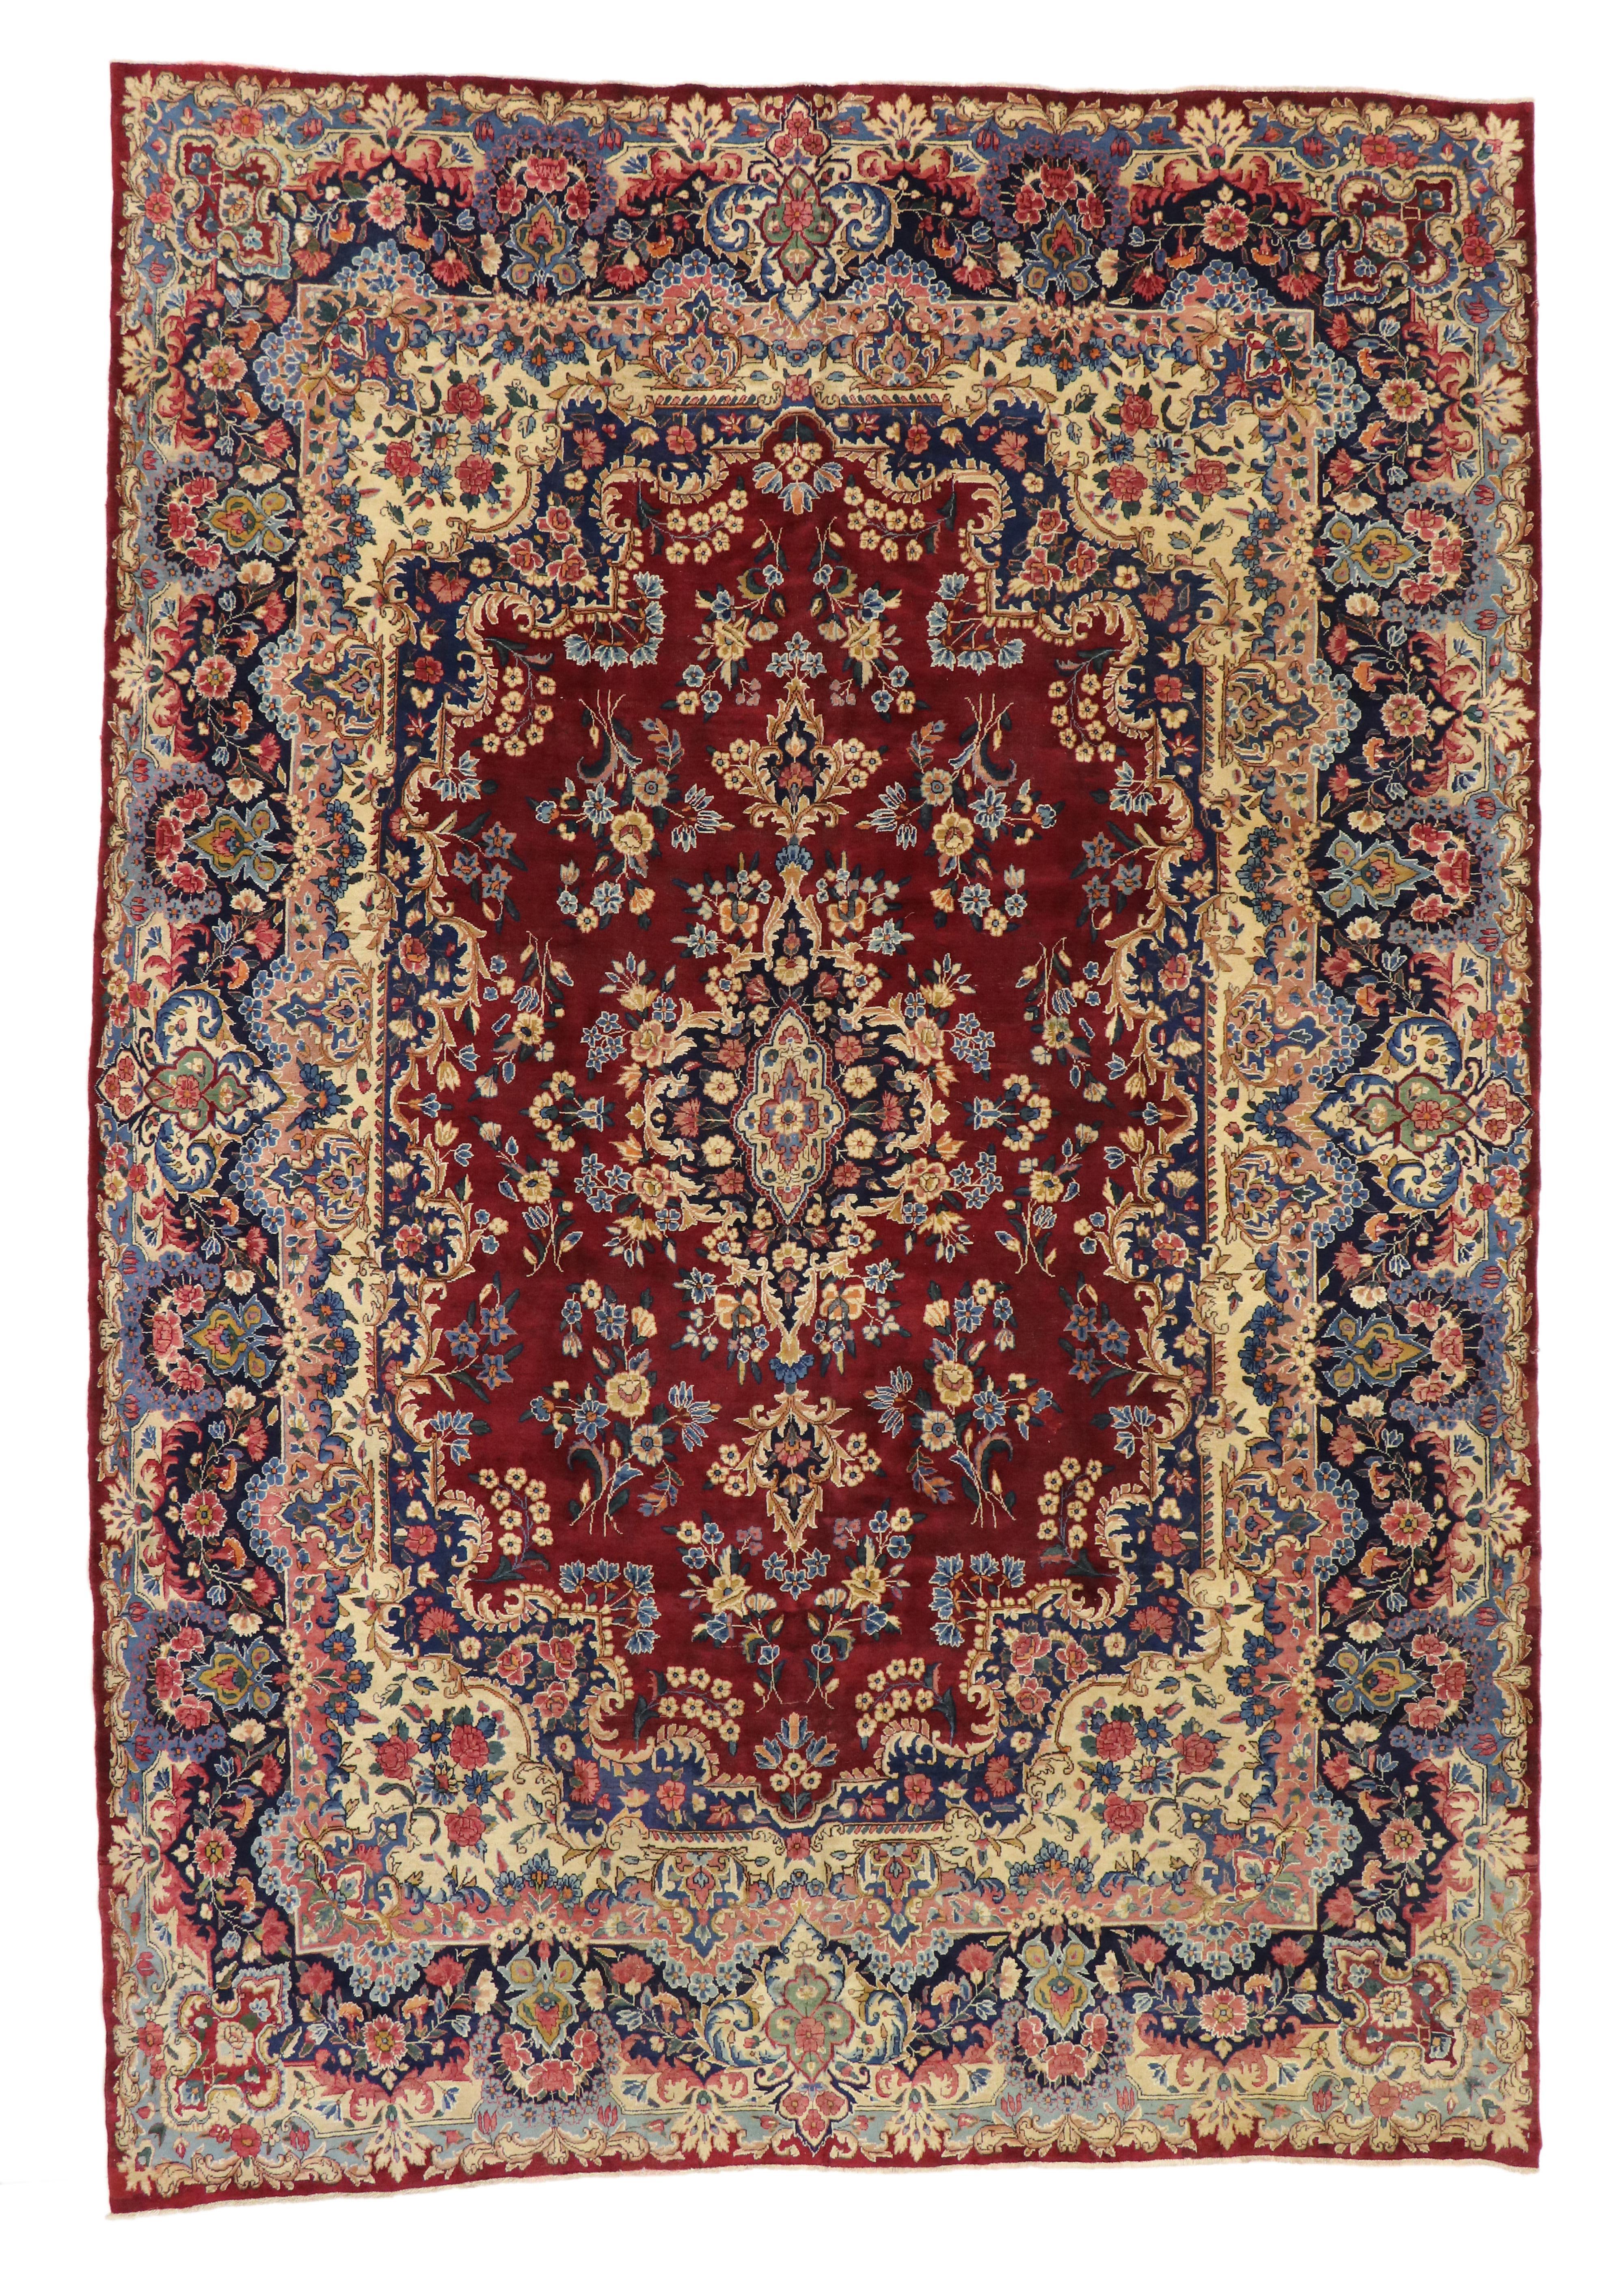 73735 Vintage Persian Yazd Rug with Traditional English and Old World Style 09'08 x 14'01. With an impressive array of realistic floral elements and brilliant, alluring color, this hand knotted wool vintage Persian Yazd rug is poised to impress. At